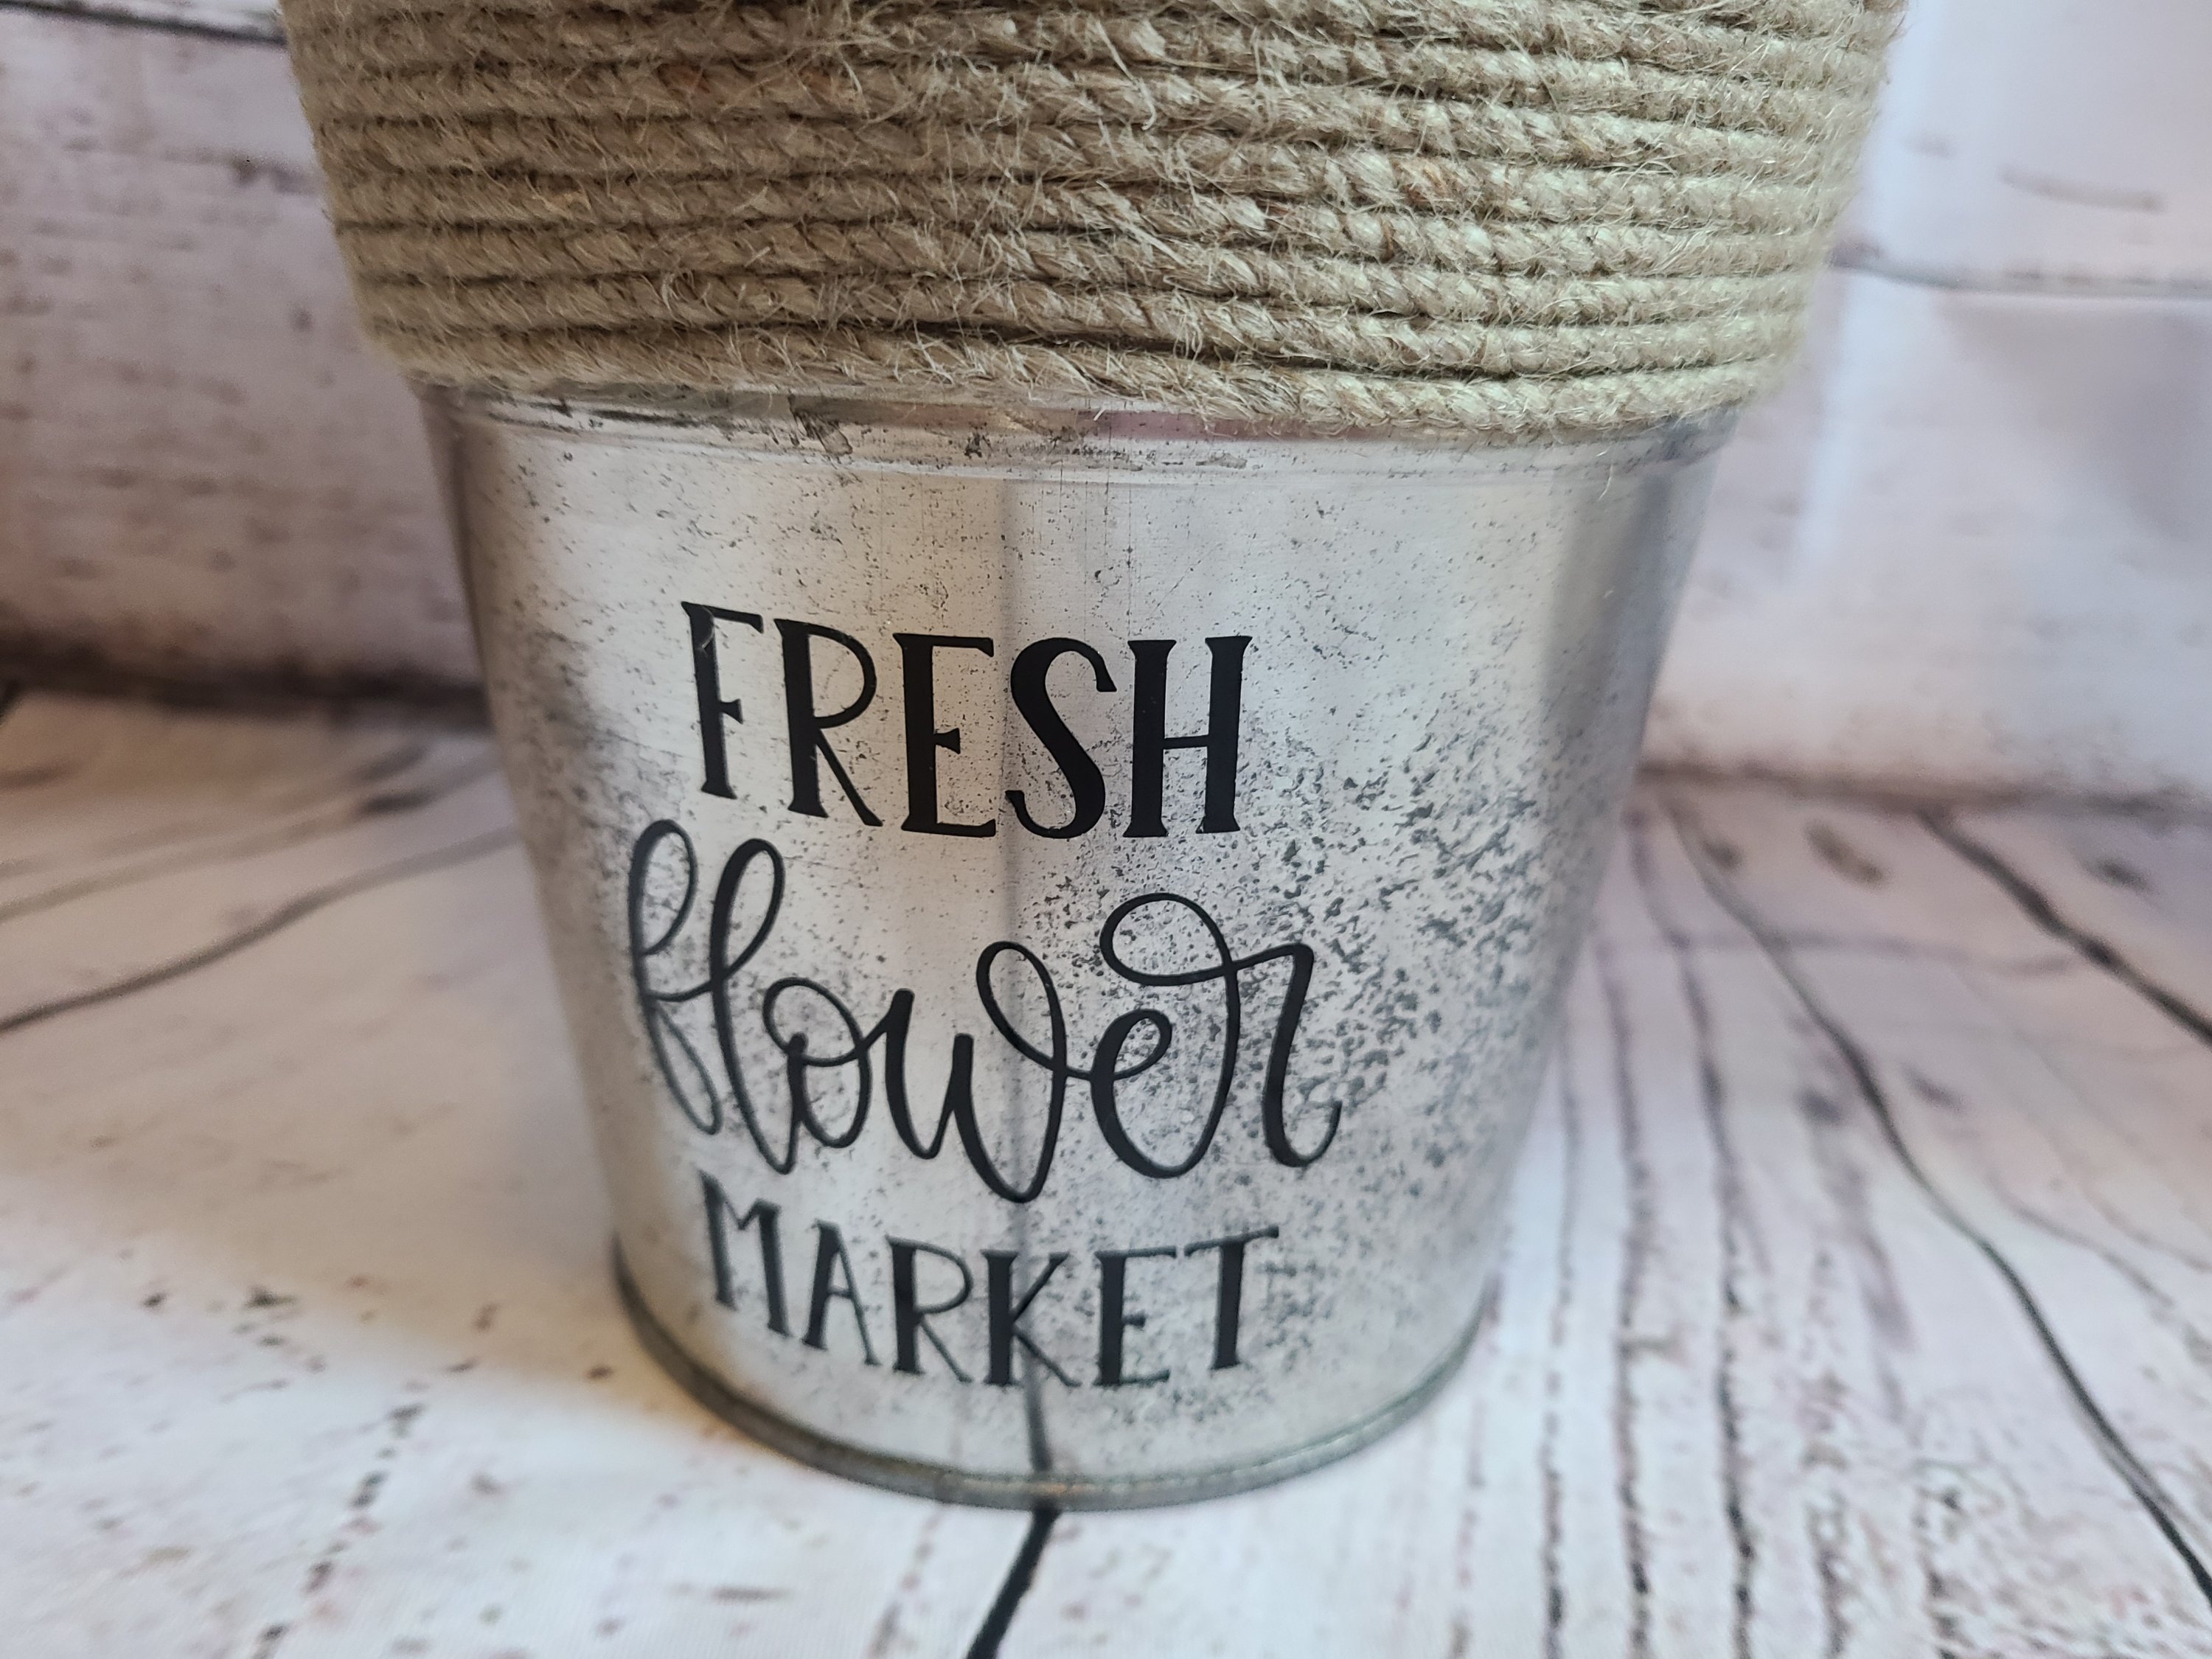 DIY galvanized metal flowerpot with "fresh flower market" on the front which will hold the end of the year teacher gift of flower seed packet, paper flowers, and a free printable gift tag.